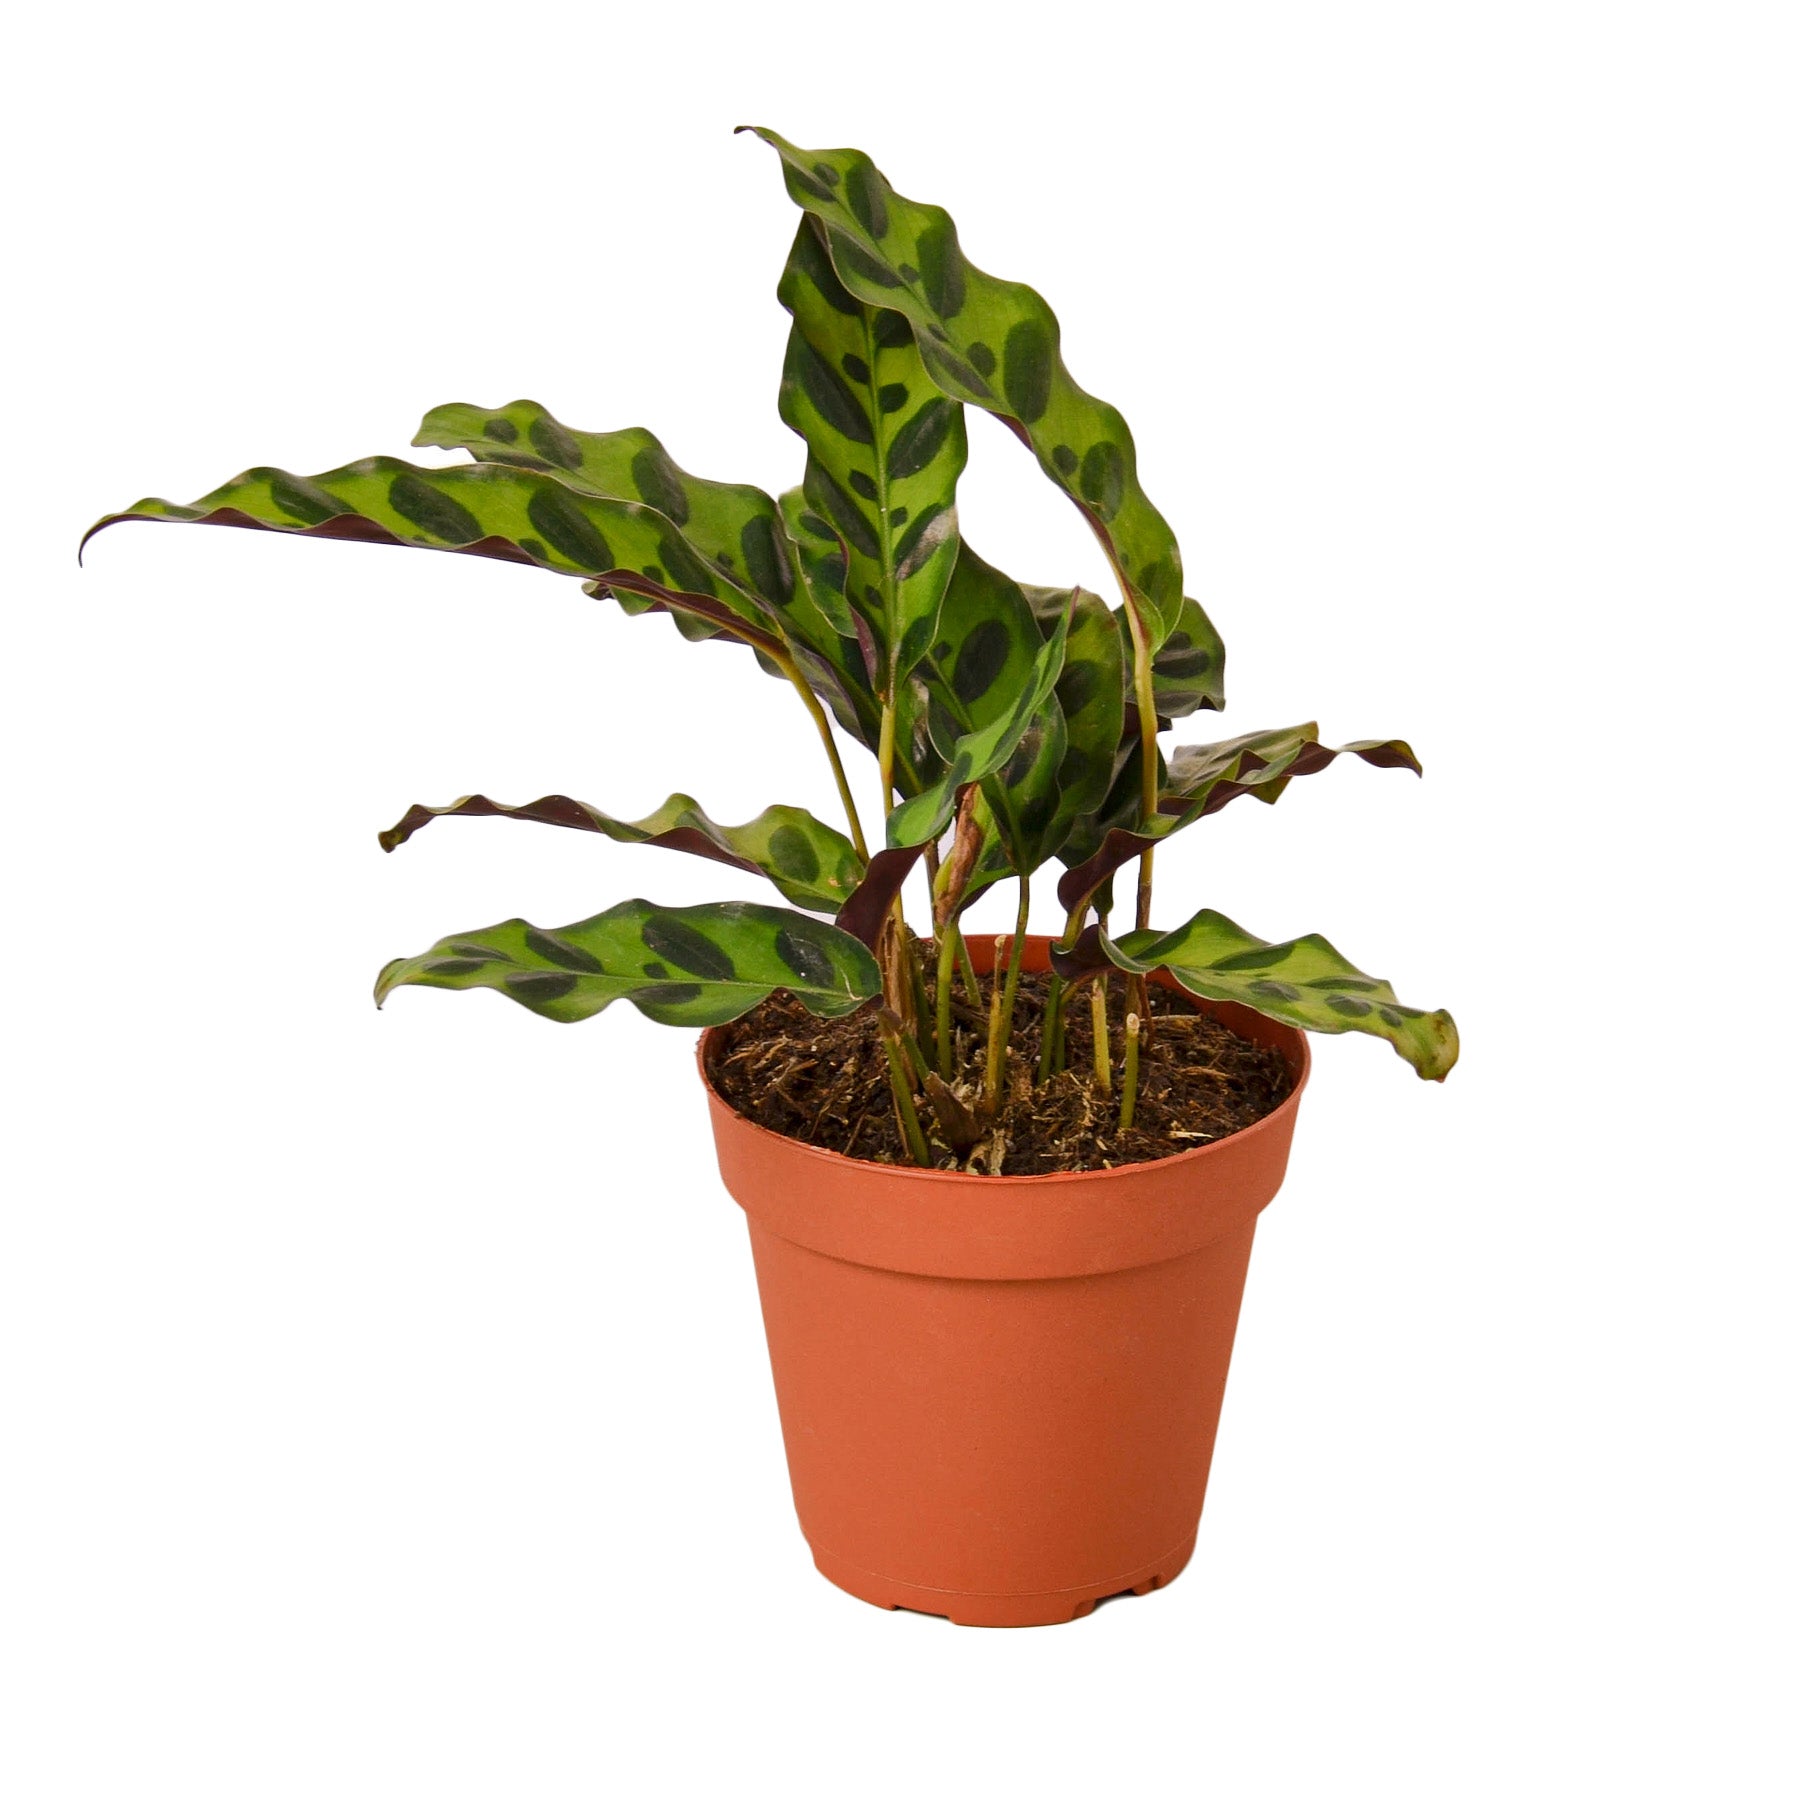 A plant in a pot on a white background.